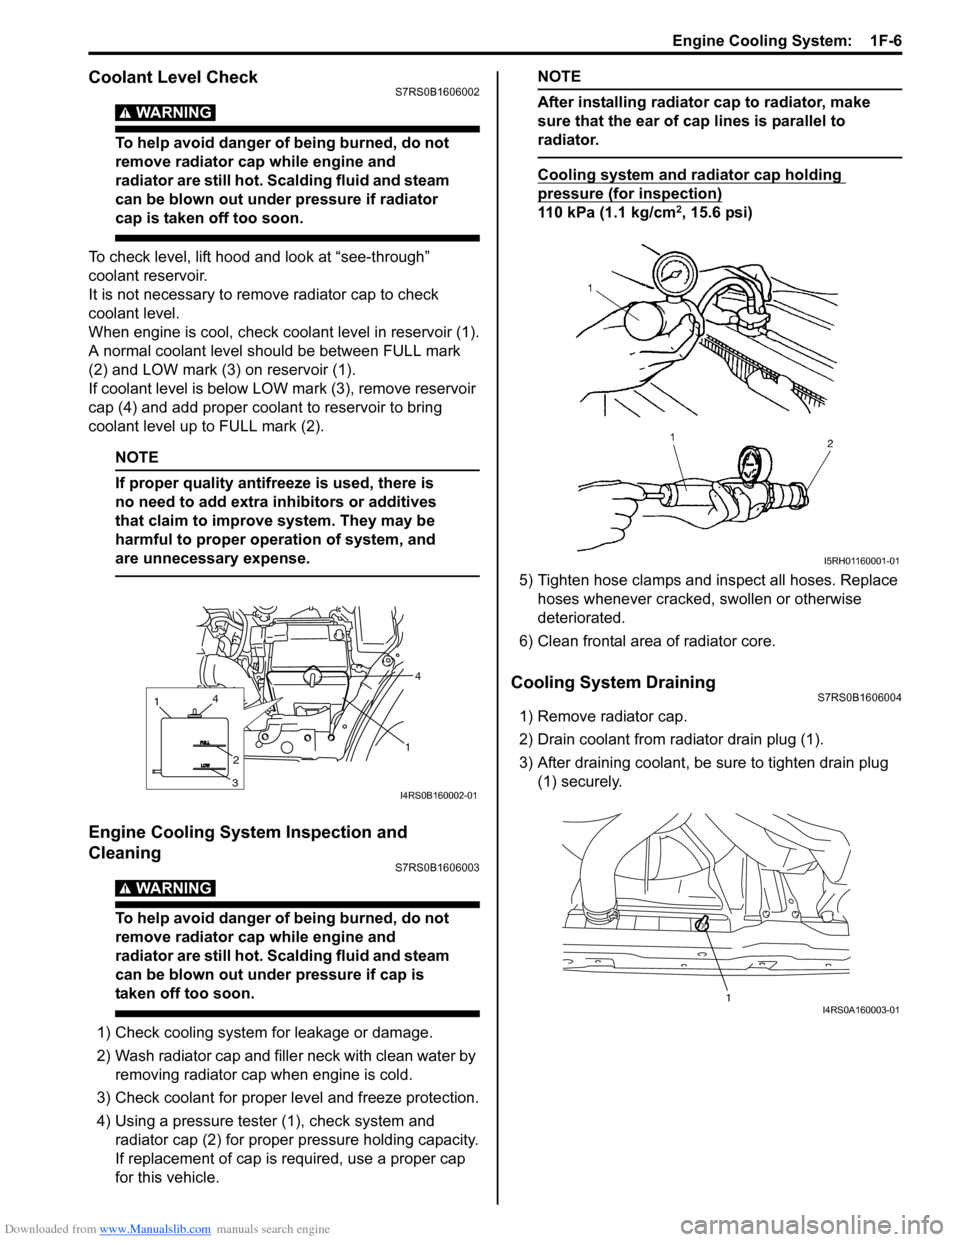 SUZUKI SWIFT 2008 2.G Service Owners Guide Downloaded from www.Manualslib.com manuals search engine Engine Cooling System:  1F-6
Coolant Level CheckS7RS0B1606002
WARNING! 
To help avoid danger of being burned, do not 
remove radiator cap while